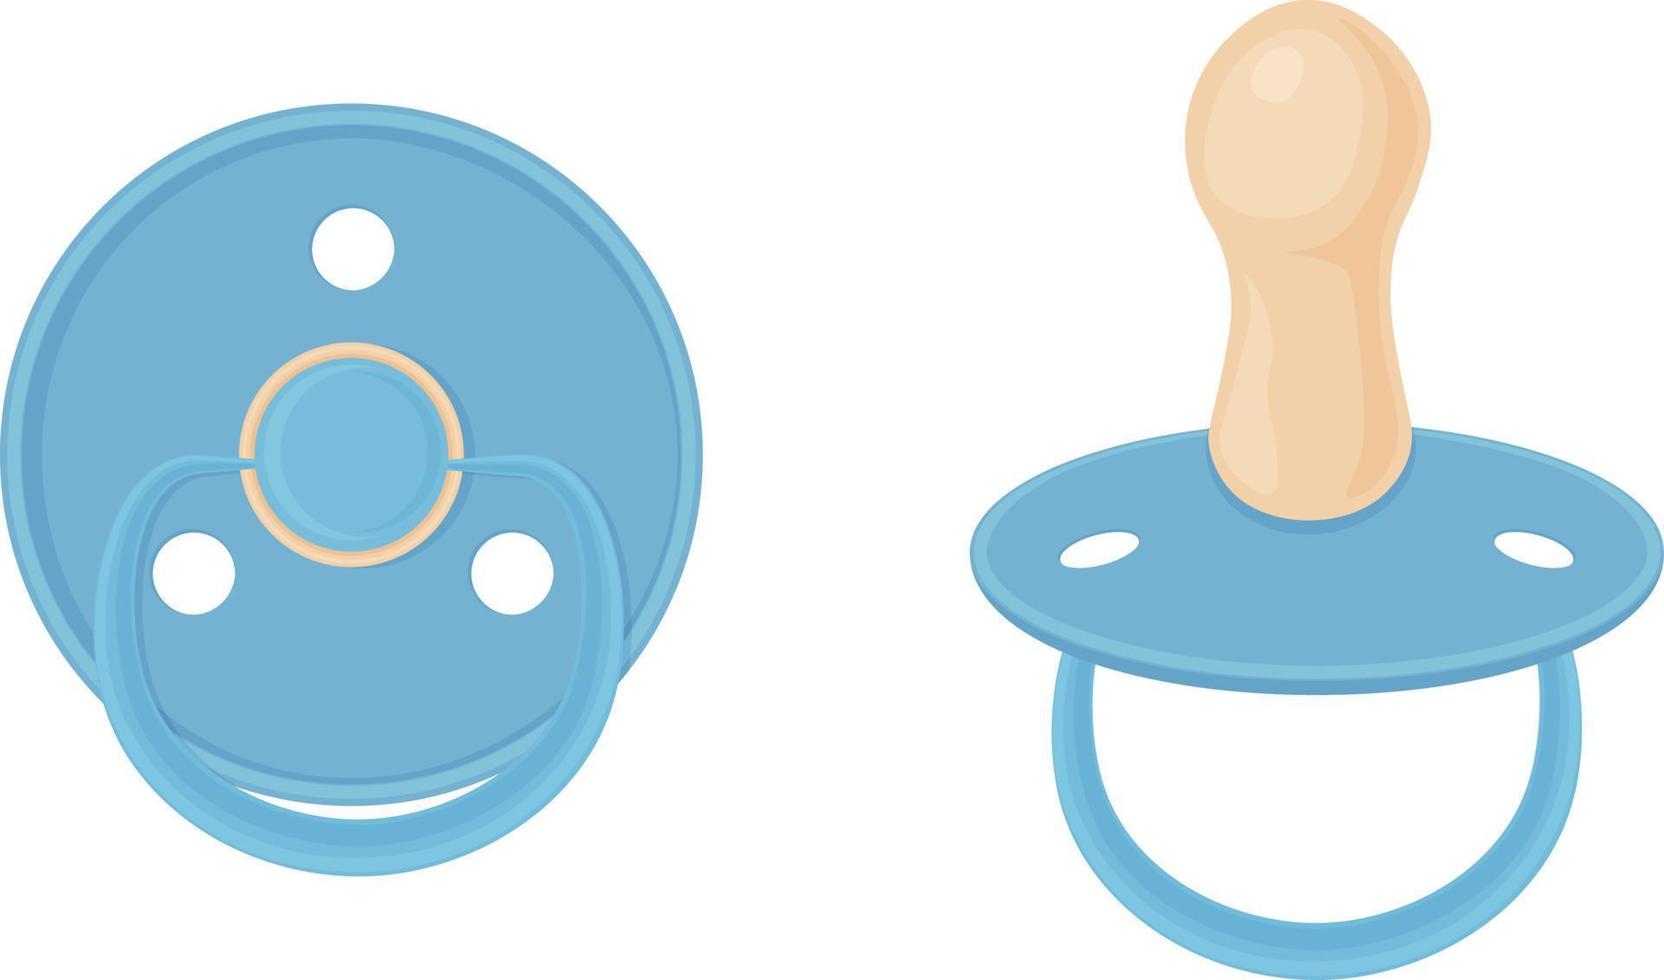 Baby pacifier nipples, blue. Baby nipples, side view and bottom view. Vector illustration isolated on a white background